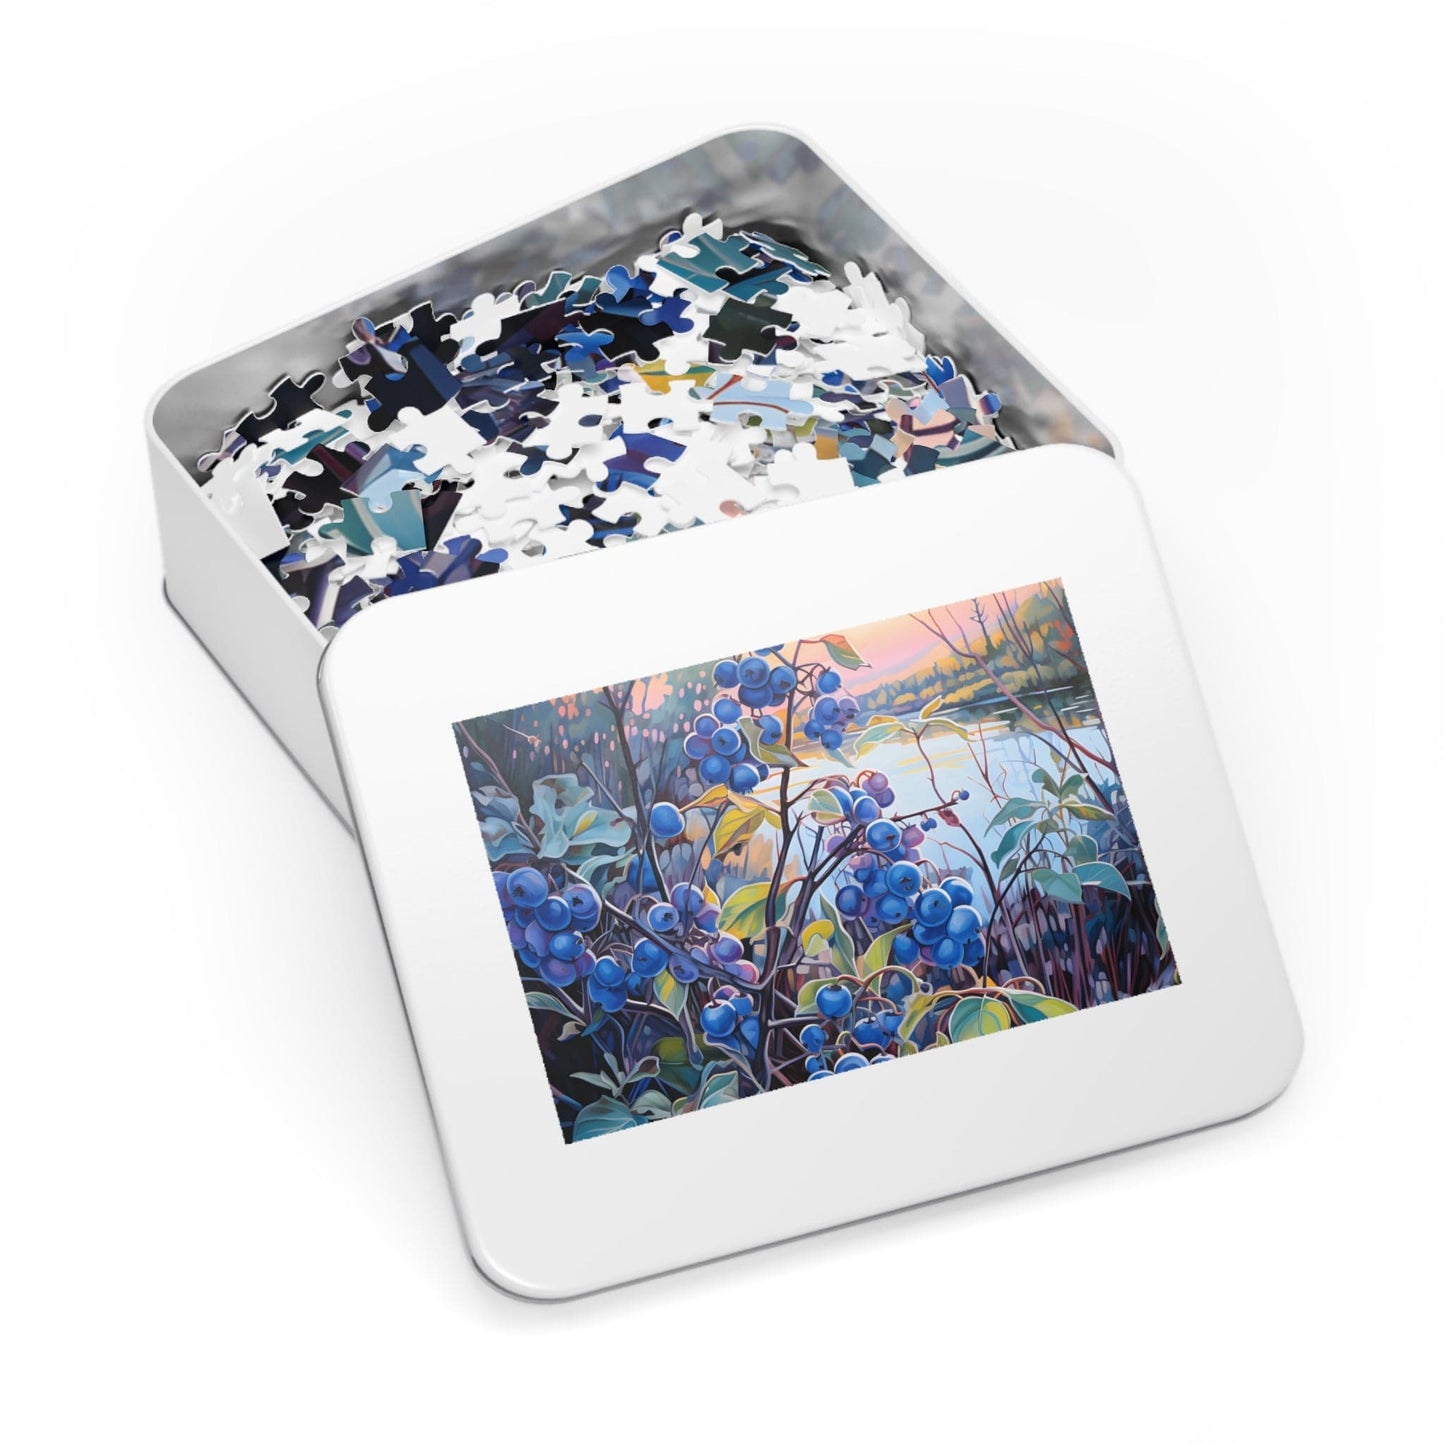 Photo Jigsaw Puzzle 1000 Pieces of Impressionist Blueberry Bush - Fun & Challenging With Boho Aesthetic - Best Gift for Teenager - Family Game - Puzzle for Adult & 14+ Kids